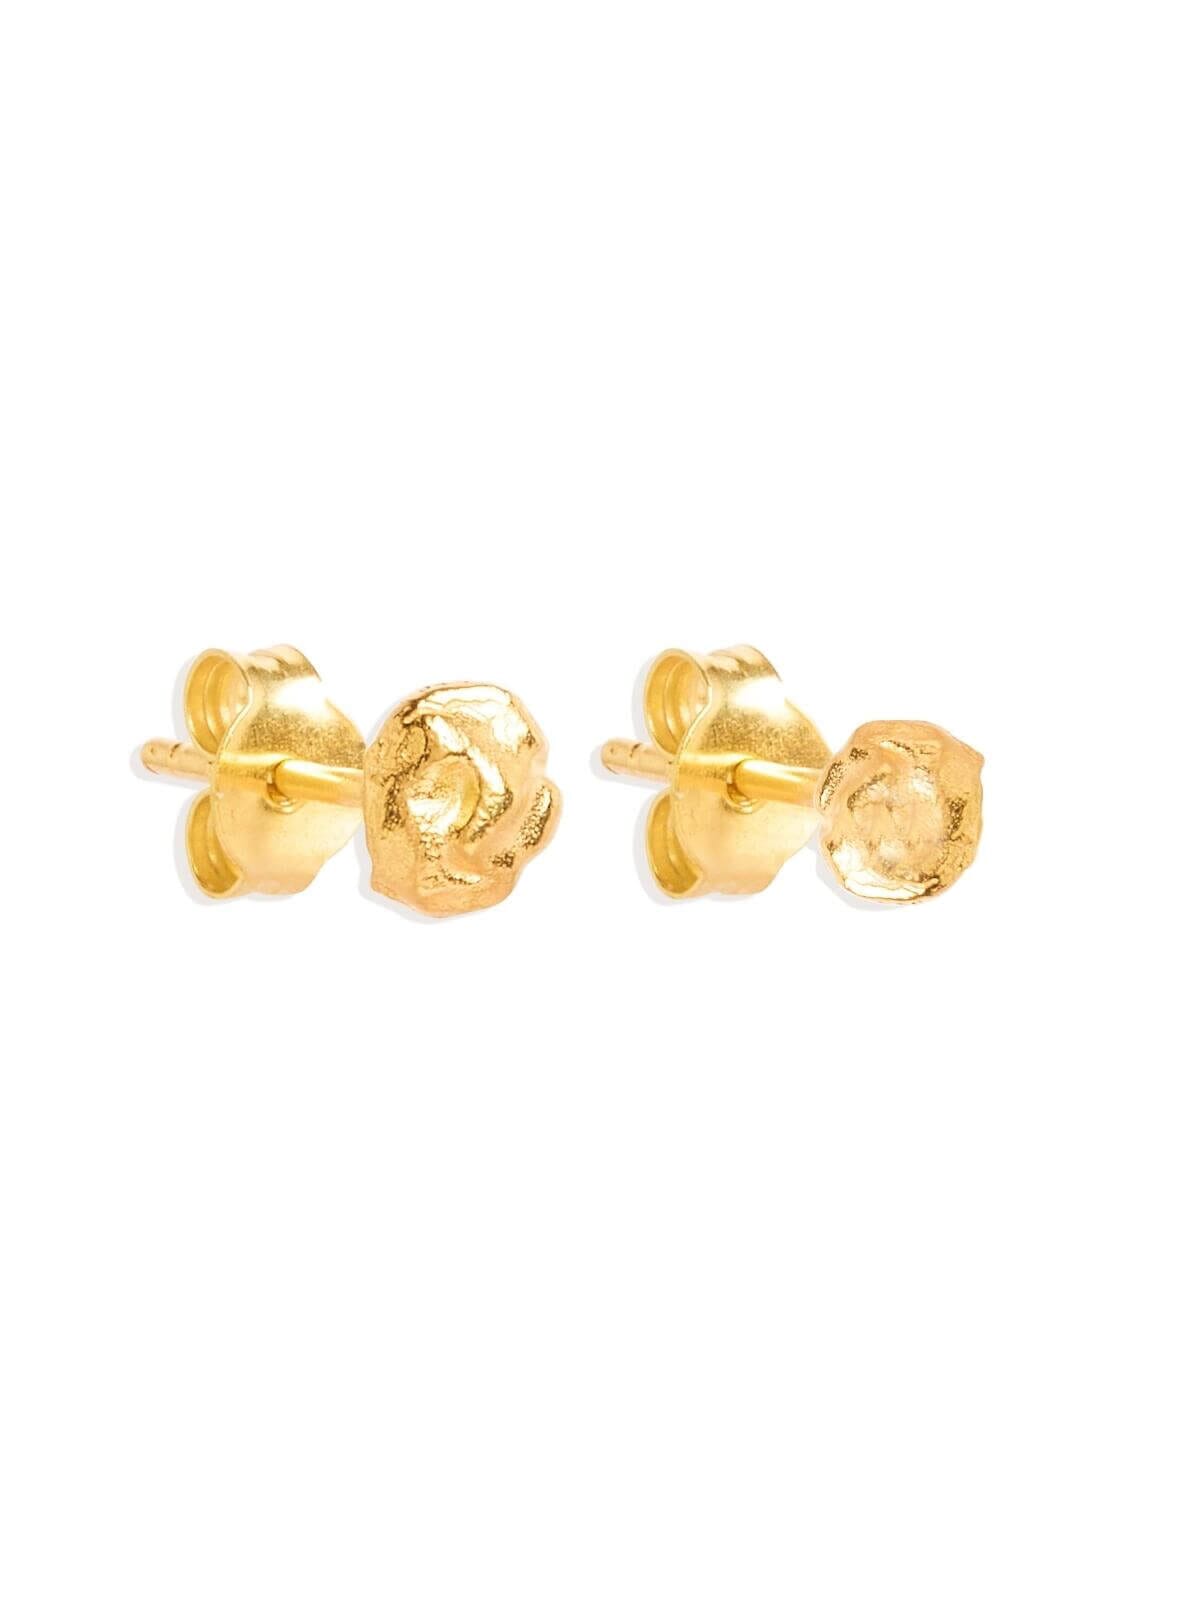 By Charlotte | All Kinds of Beautiful Stud Earrings - Gold | Perlu